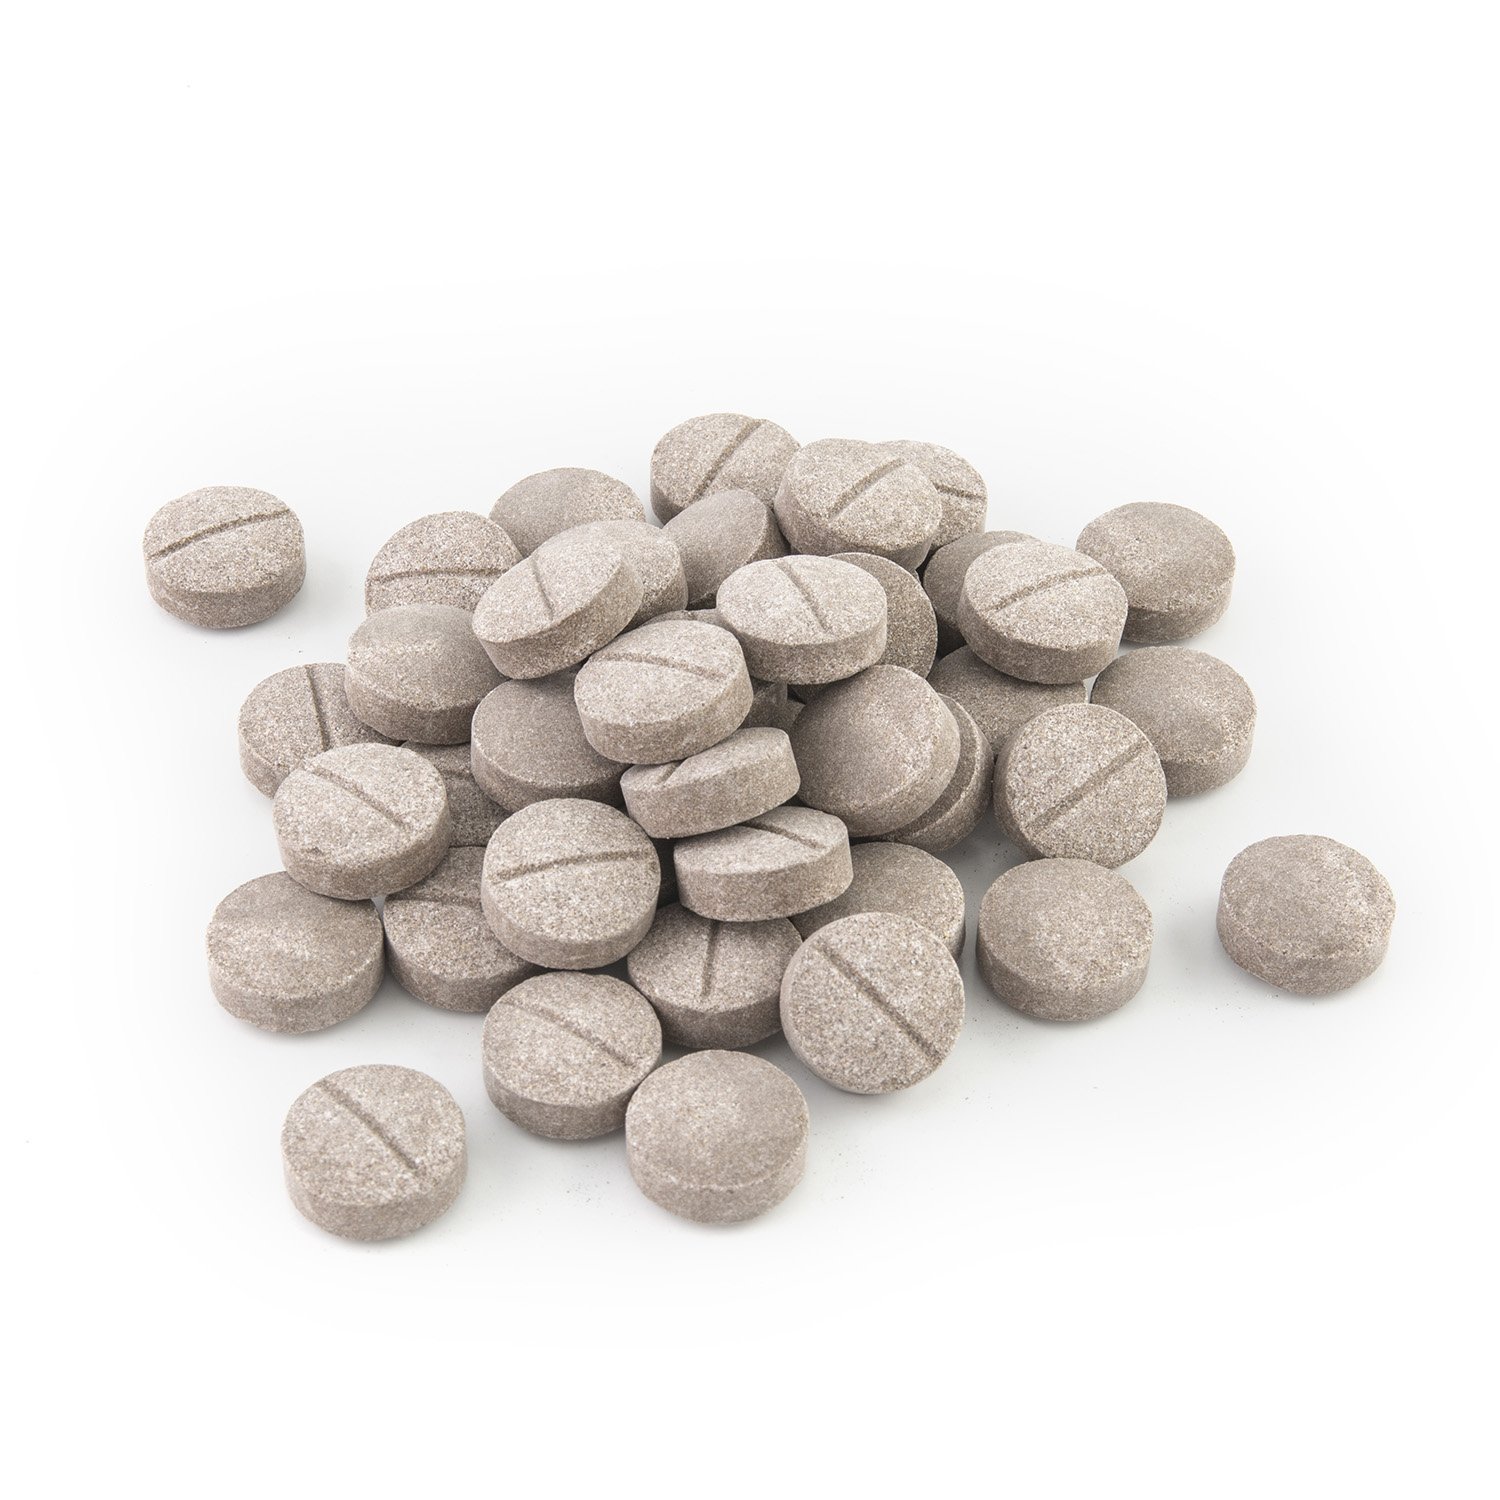 Canine_Oral_Chewable_Tablets